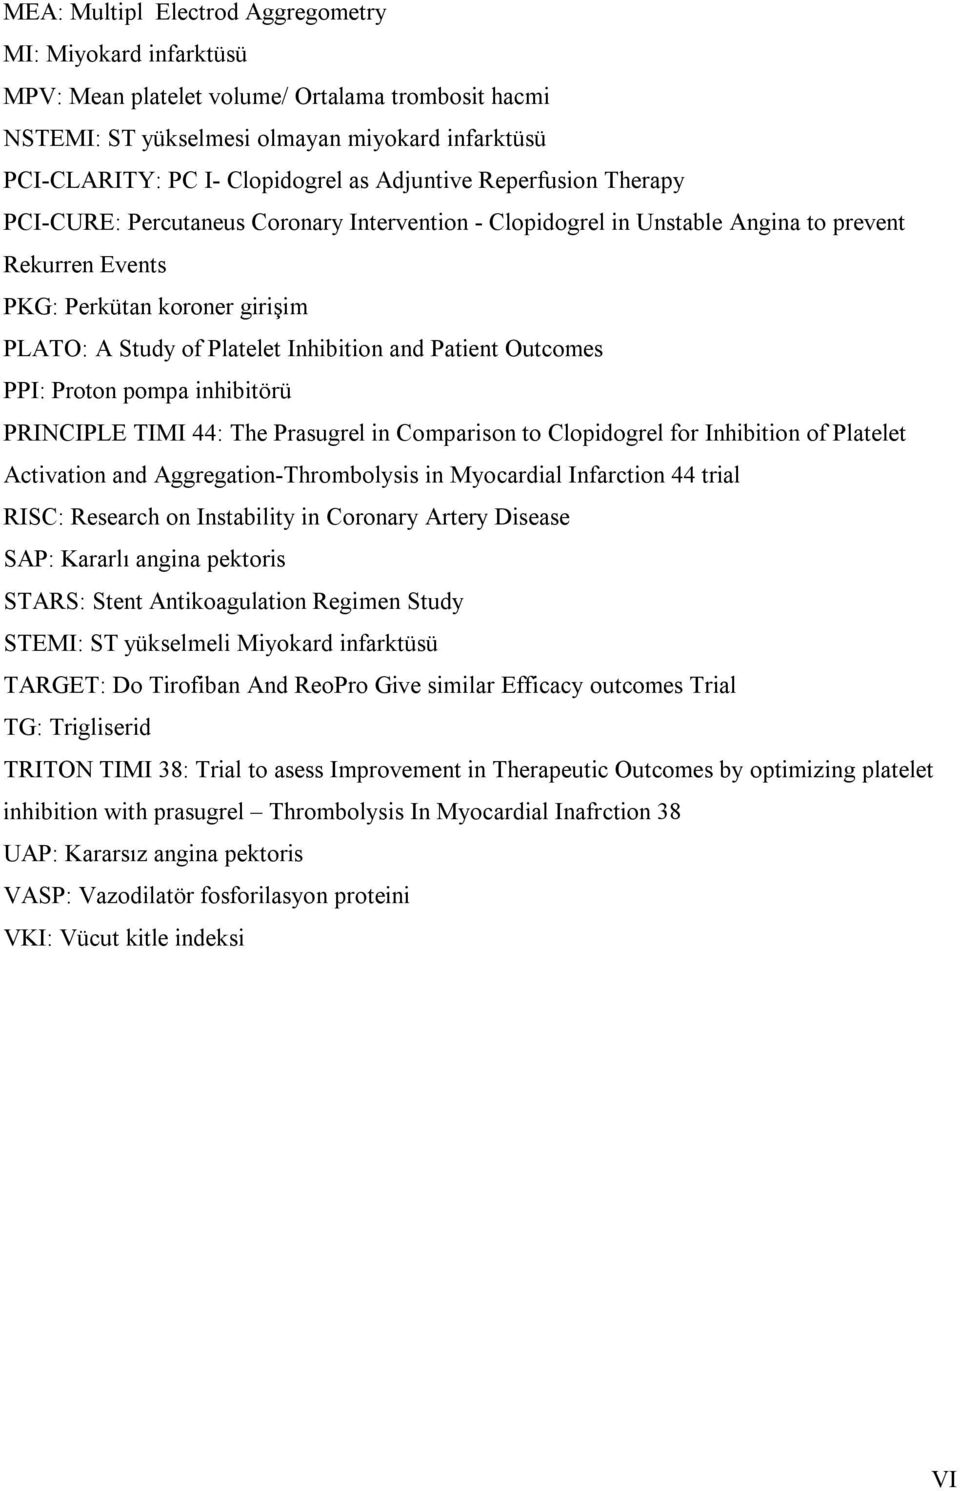 Inhibition and Patient Outcomes PPI: Proton pompa inhibitörü PRINCIPLE TIMI 44: The Prasugrel in Comparison to Clopidogrel for Inhibition of Platelet Activation and Aggregation-Thrombolysis in